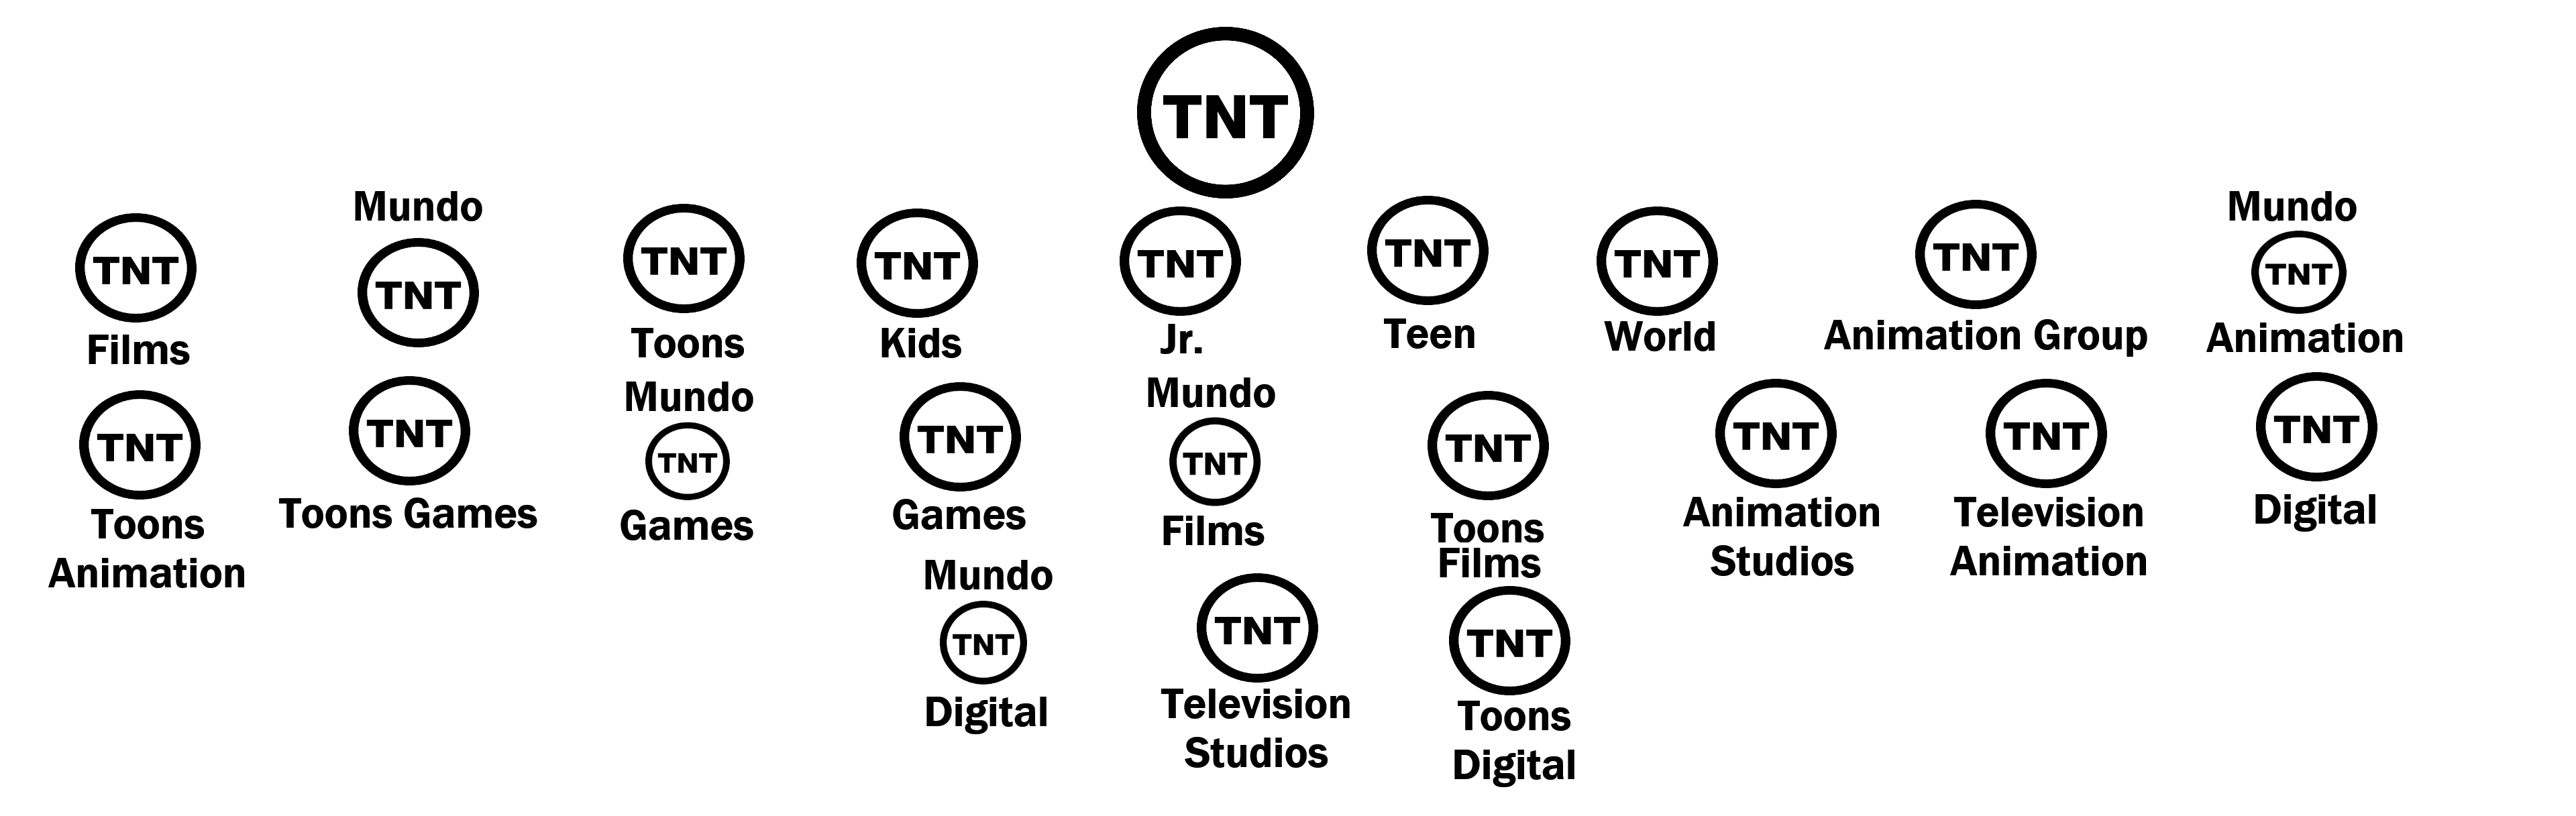 The TNT 2001 logo requests by Foodinator by melvin764g on DeviantArt